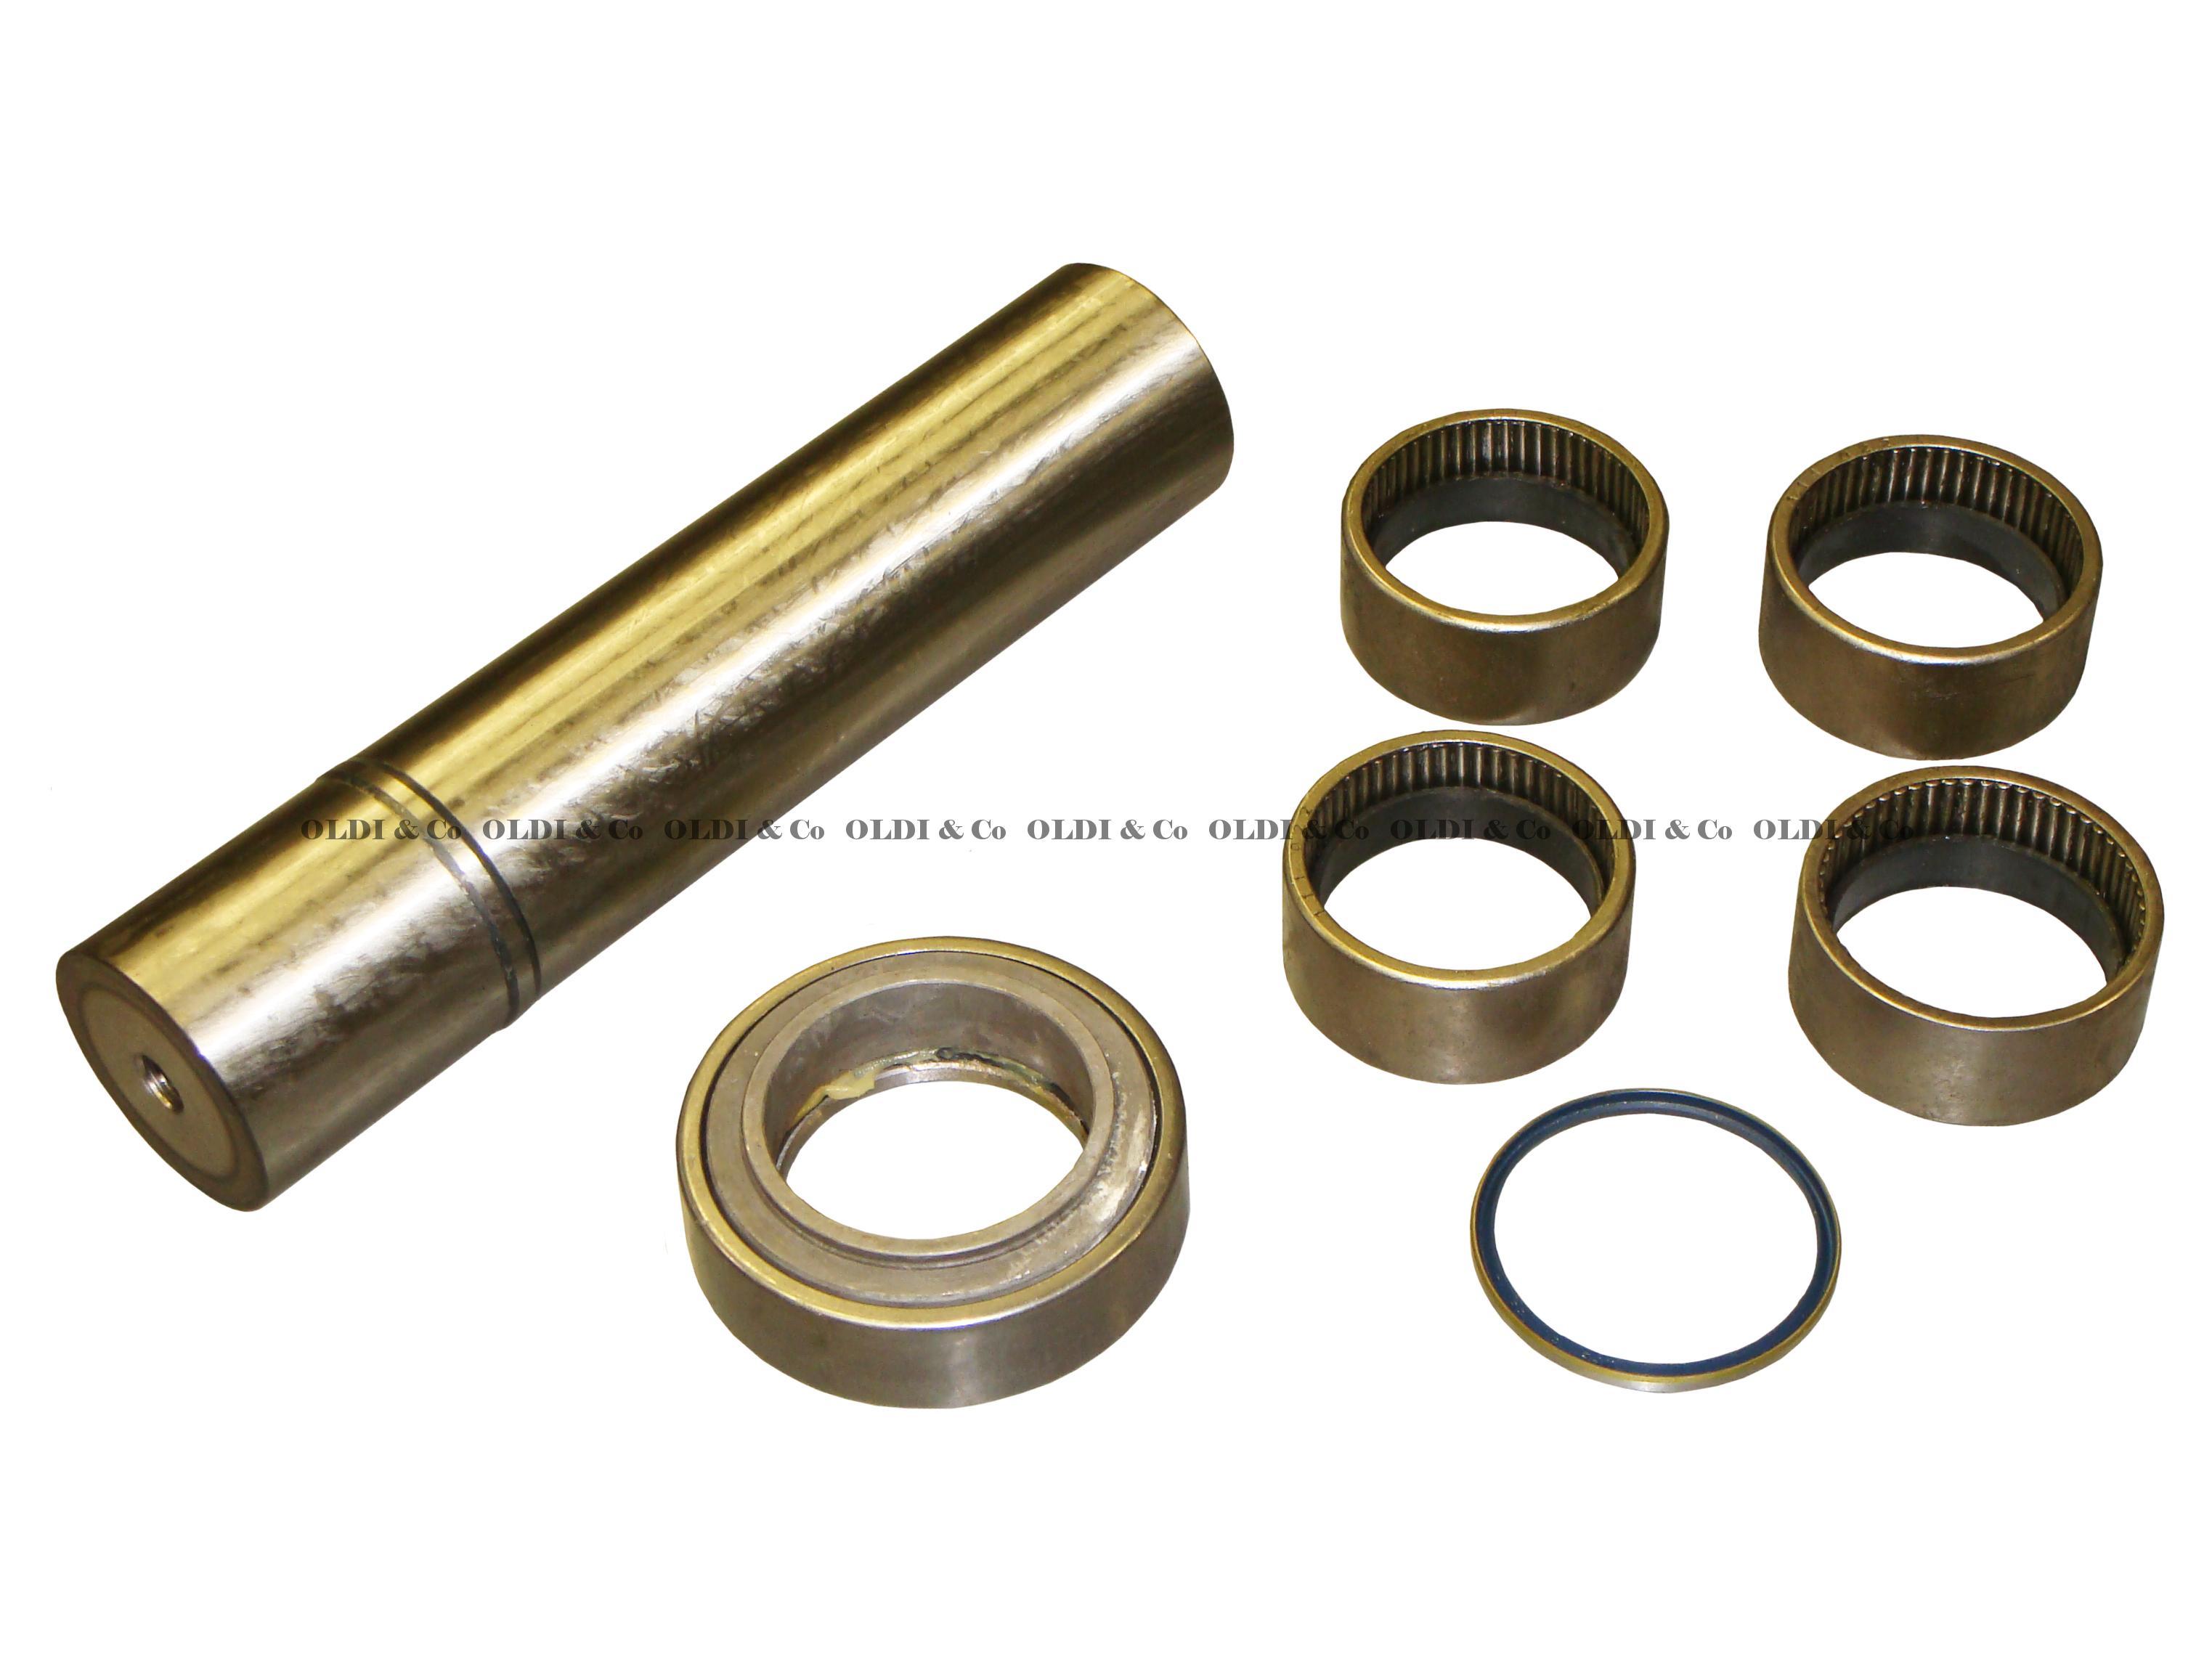 34.074.17421 Suspension parts → King pin - steering knuckle rep. kit